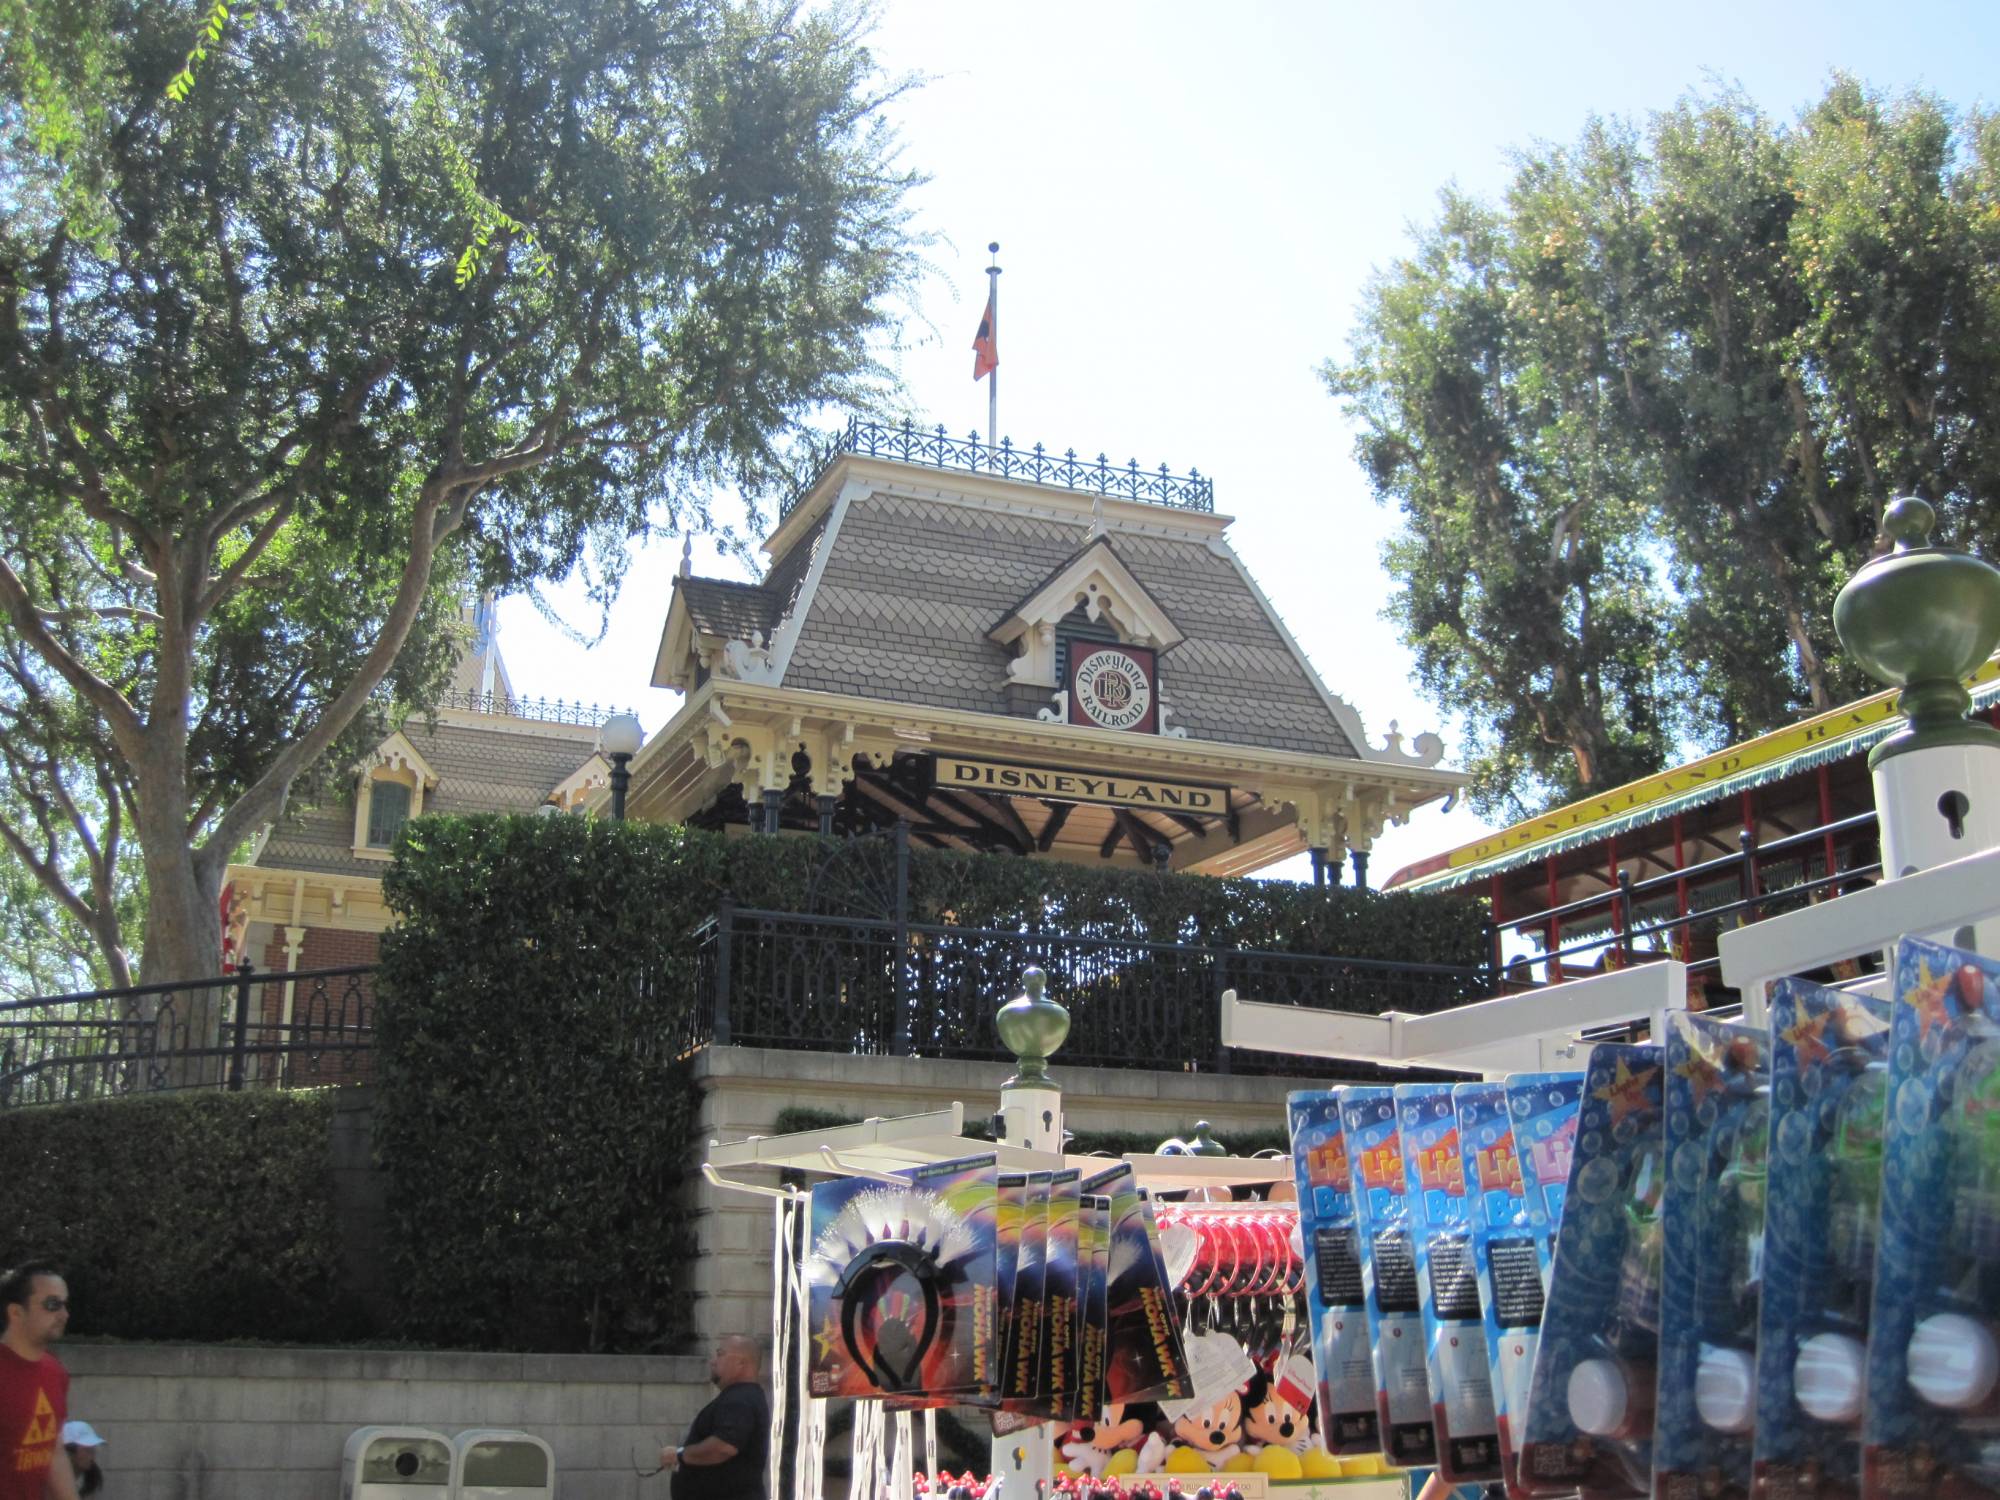 Go behind the scenes with a backstage tour at Disneyland | PassPorter.com